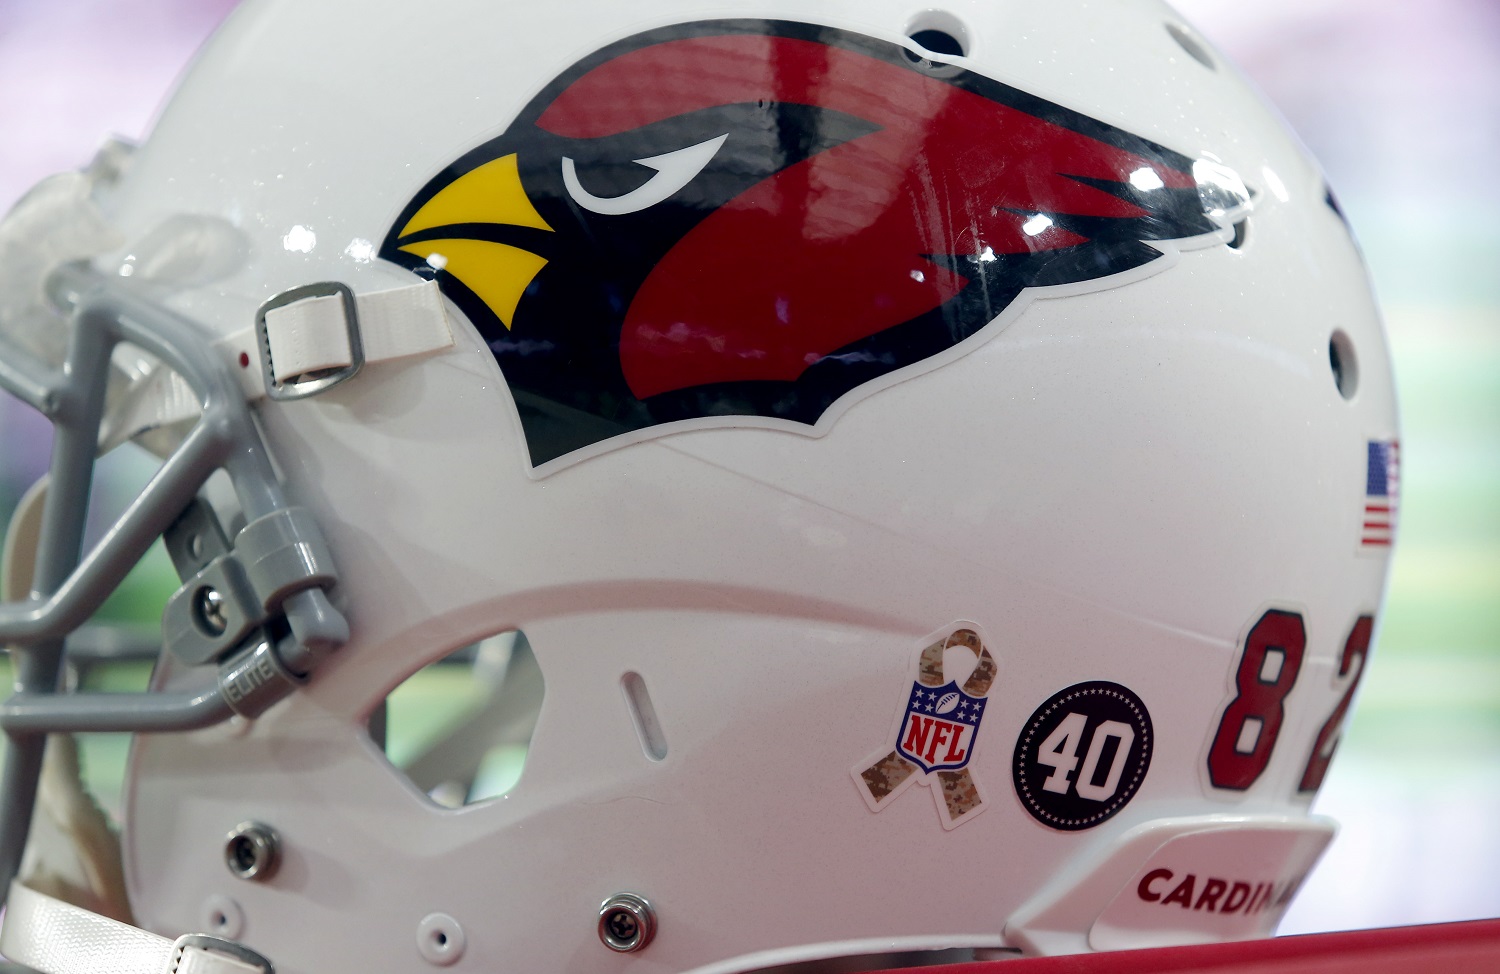 An NFL Salute to Service logo and a Pat Tillman "40" is shown on th back of a Arizona Cardinals players' helmet during the second half of an NFL football game against the St. Louis Rams, Sunday, Nov. 9, 2014, in Glendale, Ariz. (AP Photo/Rick Scuteri)